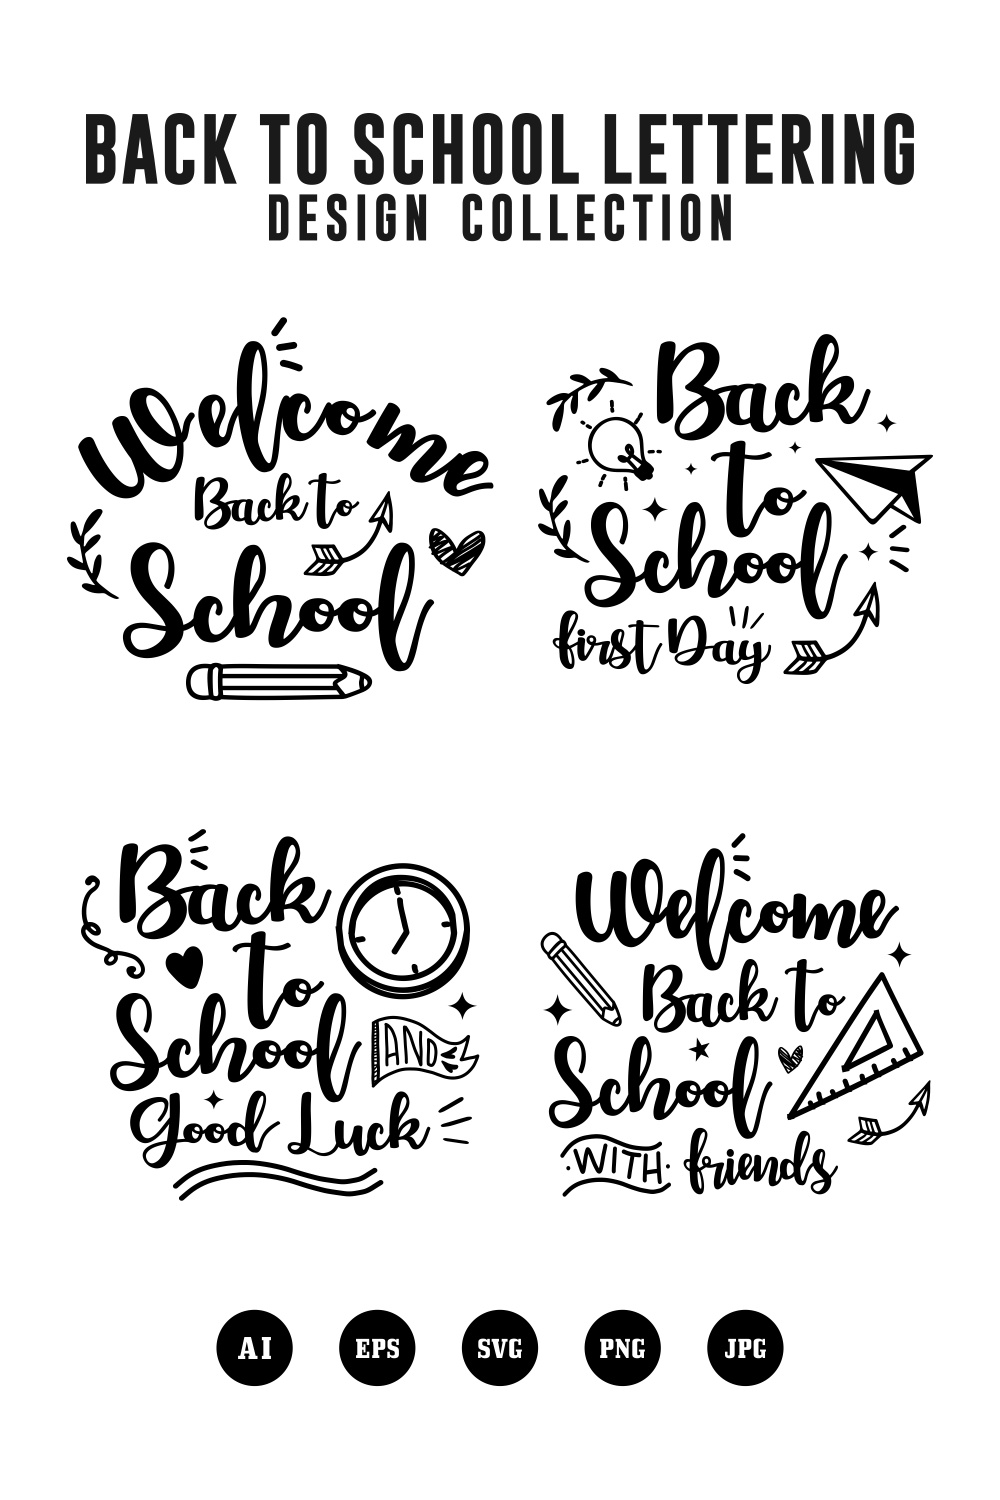 Set Back to school lettering design collection - $6 pinterest preview image.